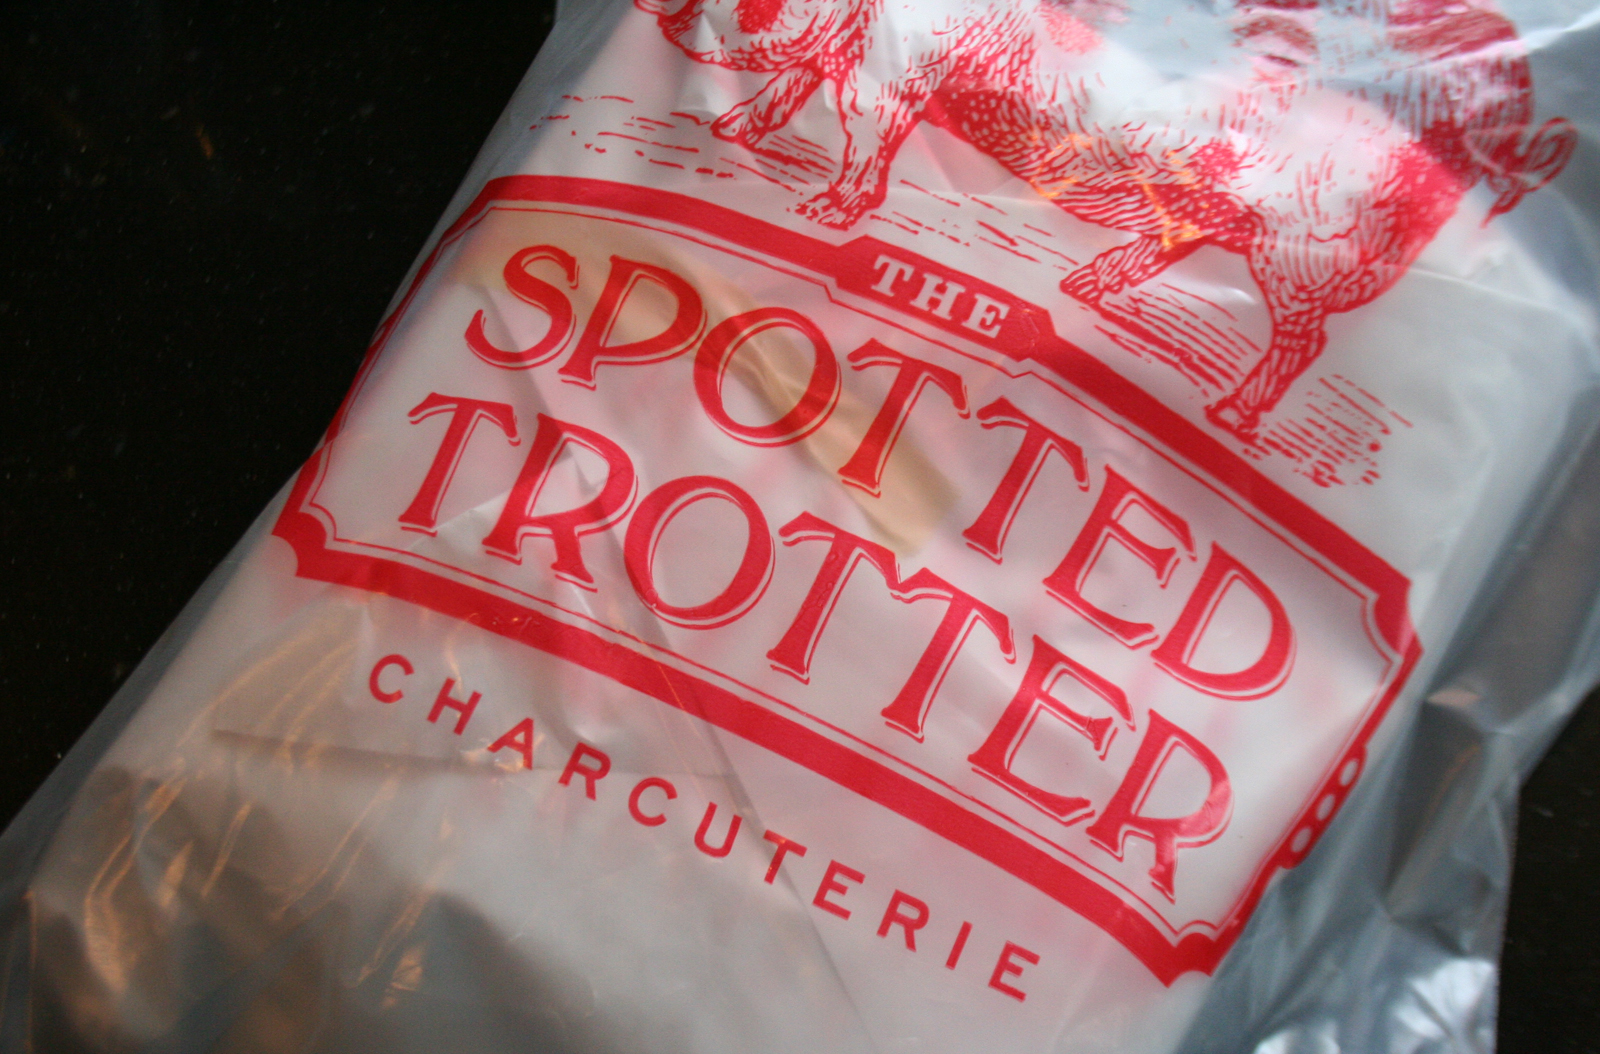 Pork fat from the Spotted Trotter charcuterie